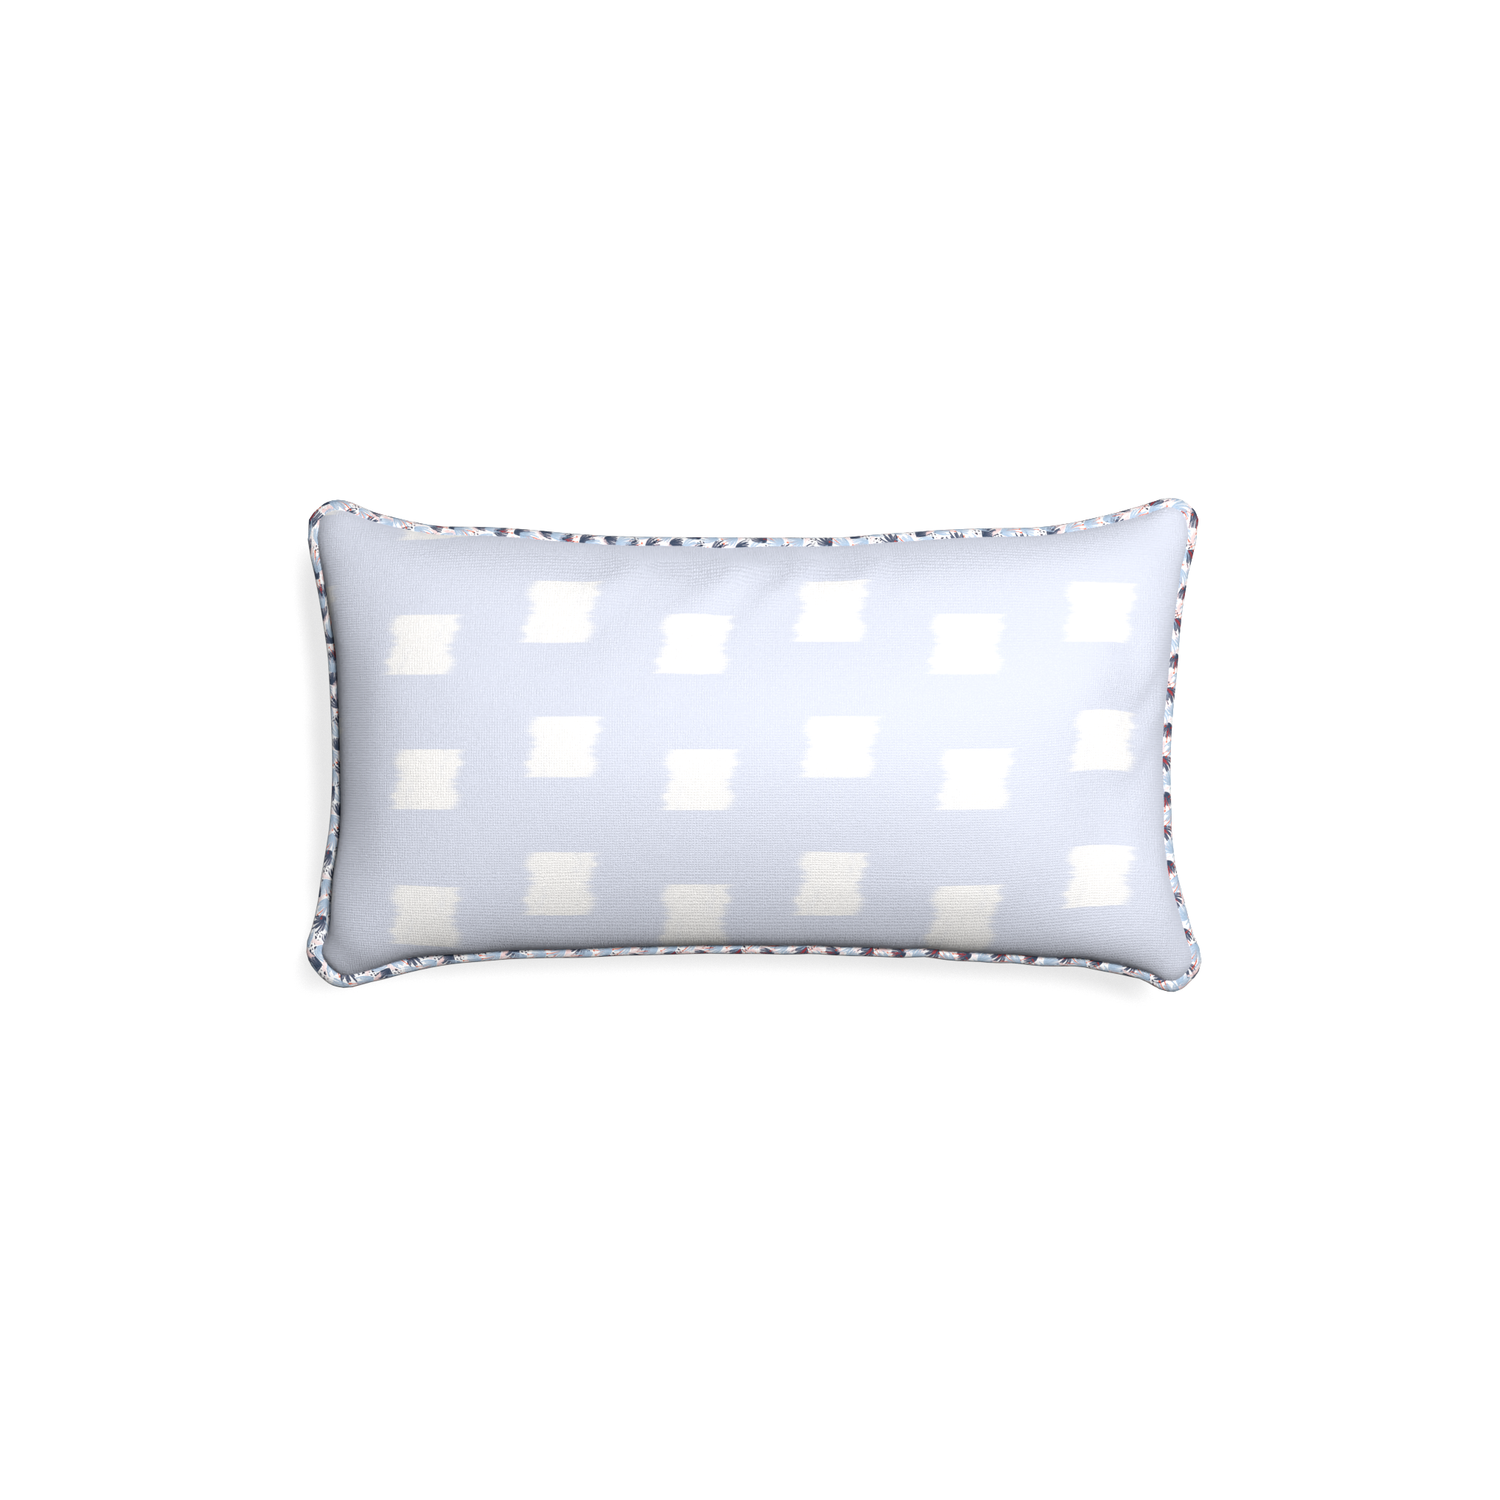 Petite-lumbar denton custom sky blue patternpillow with e piping on white background